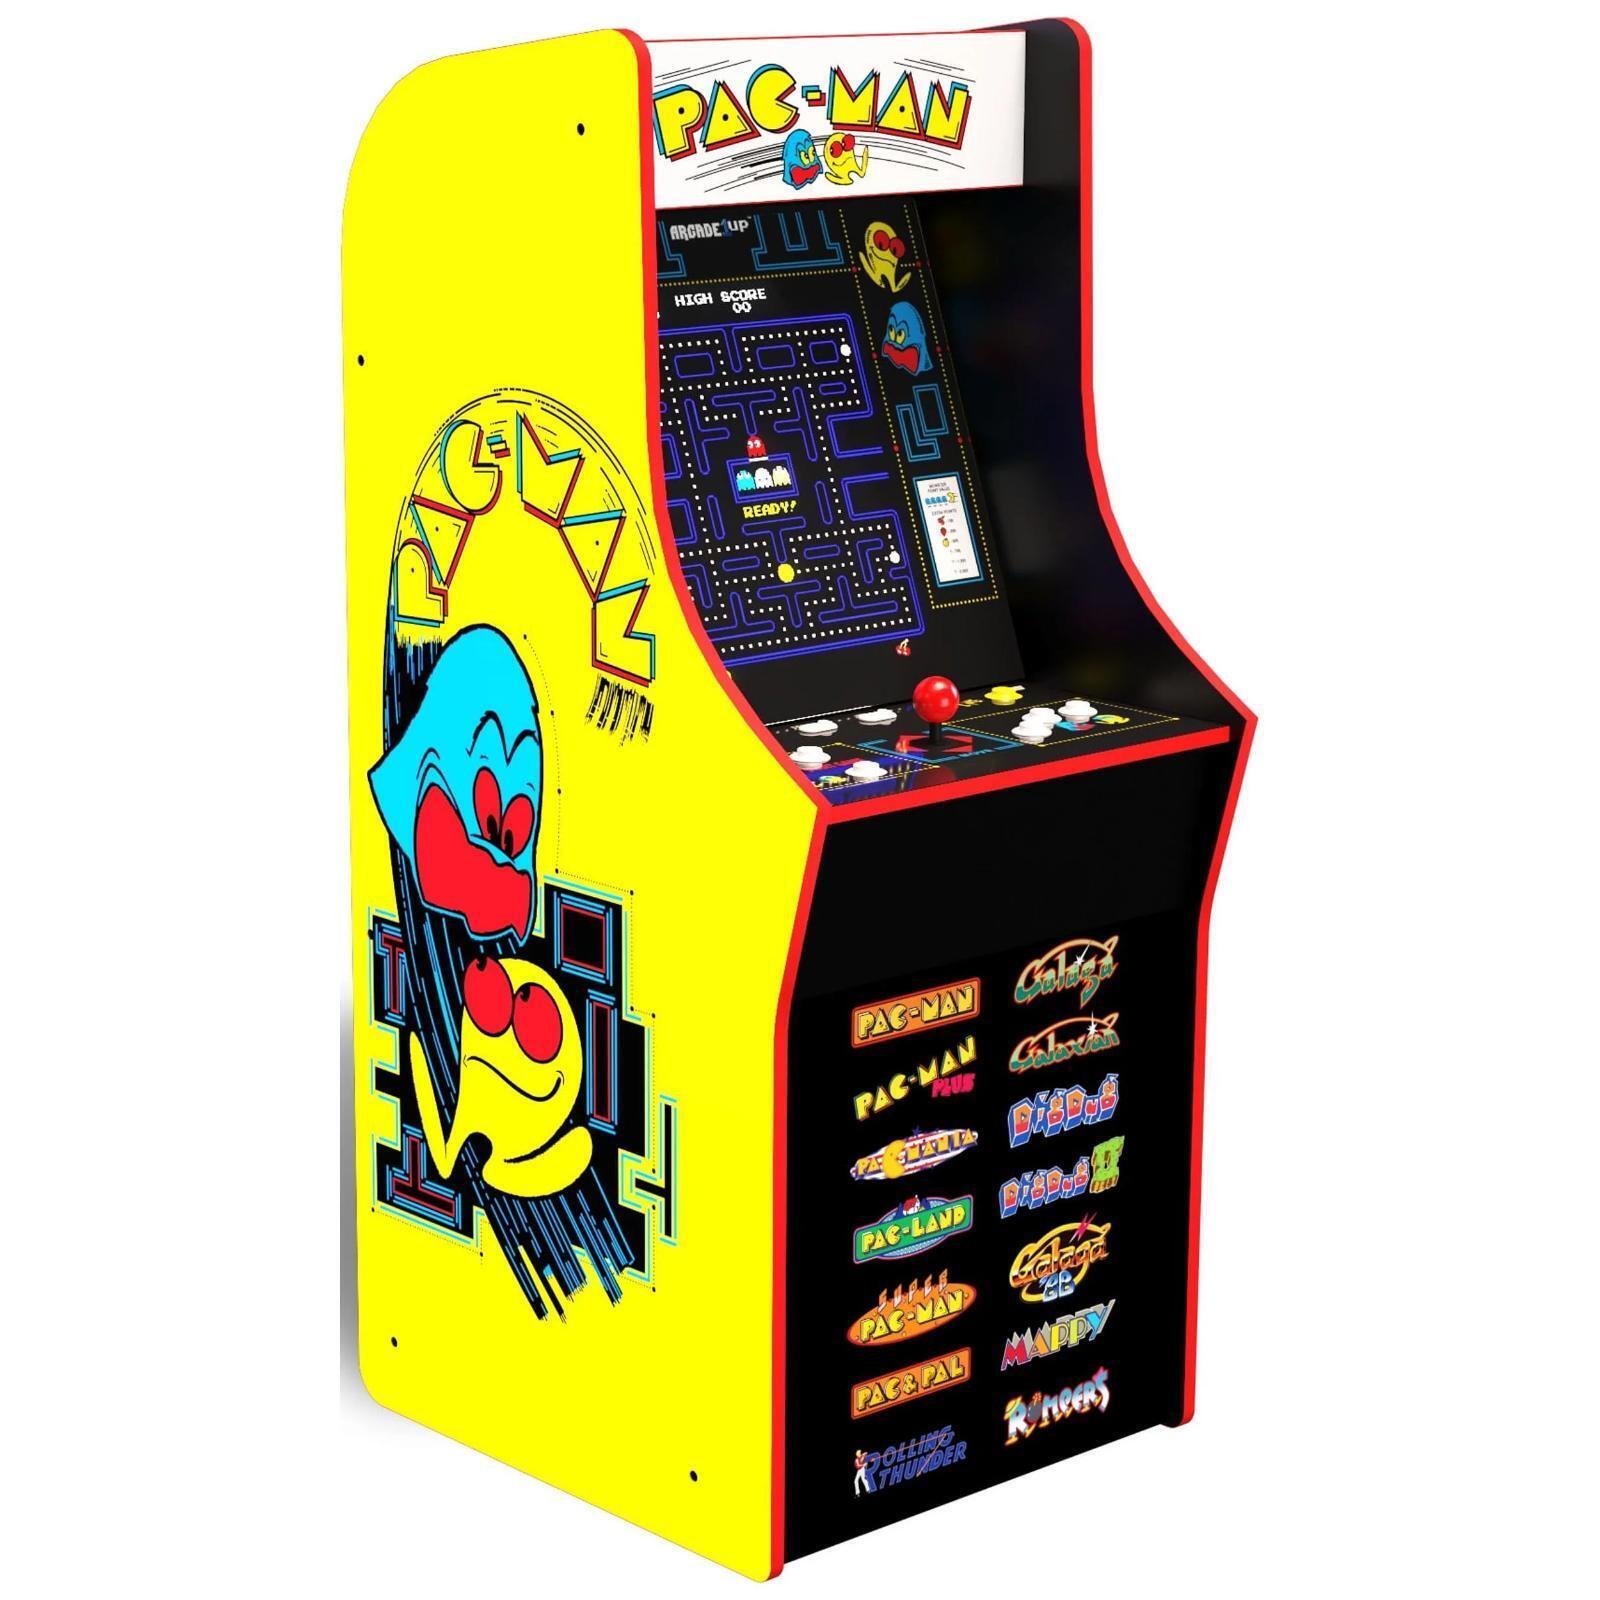 PAC-MAN Arcade1Up Arcade Video Game Machine 4-FtTall Cabinet 14 Classic Games